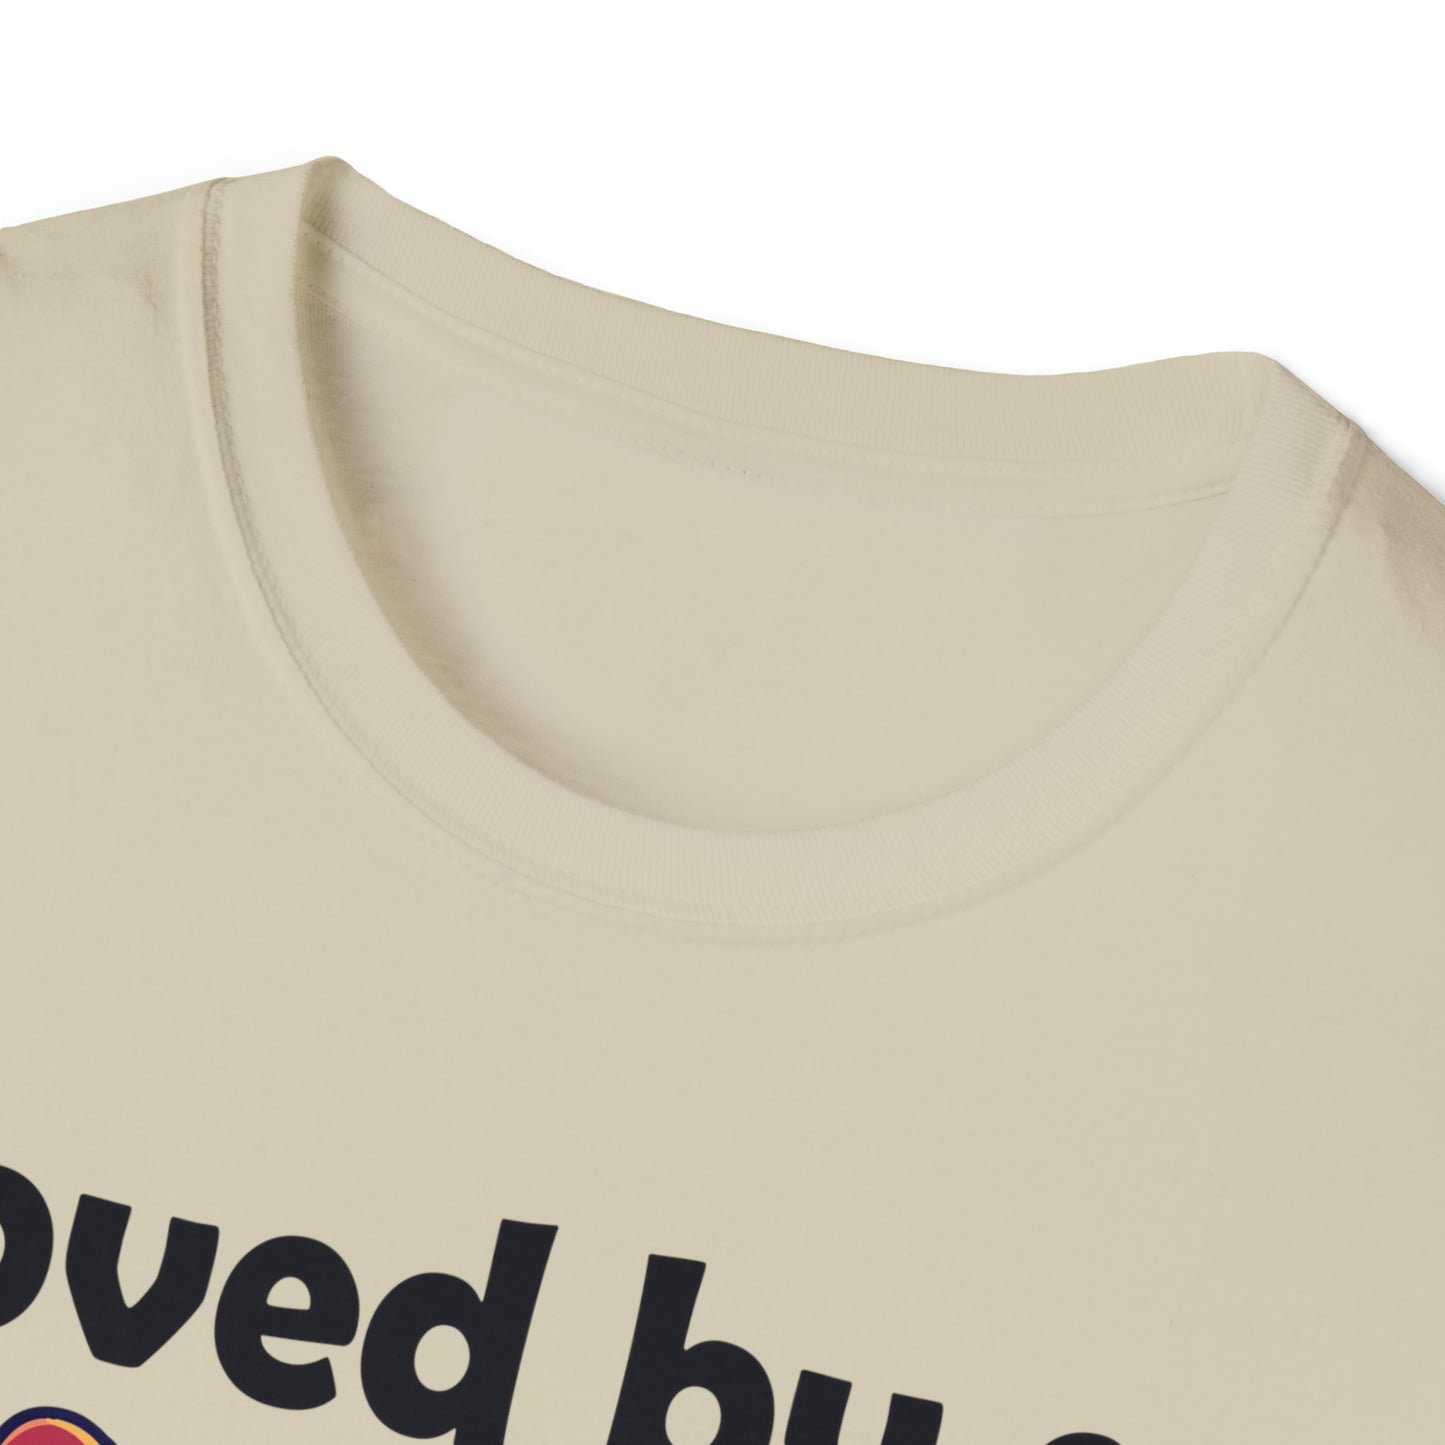 LOVED BY SHIBA Unisex Softstyle T-Shirt